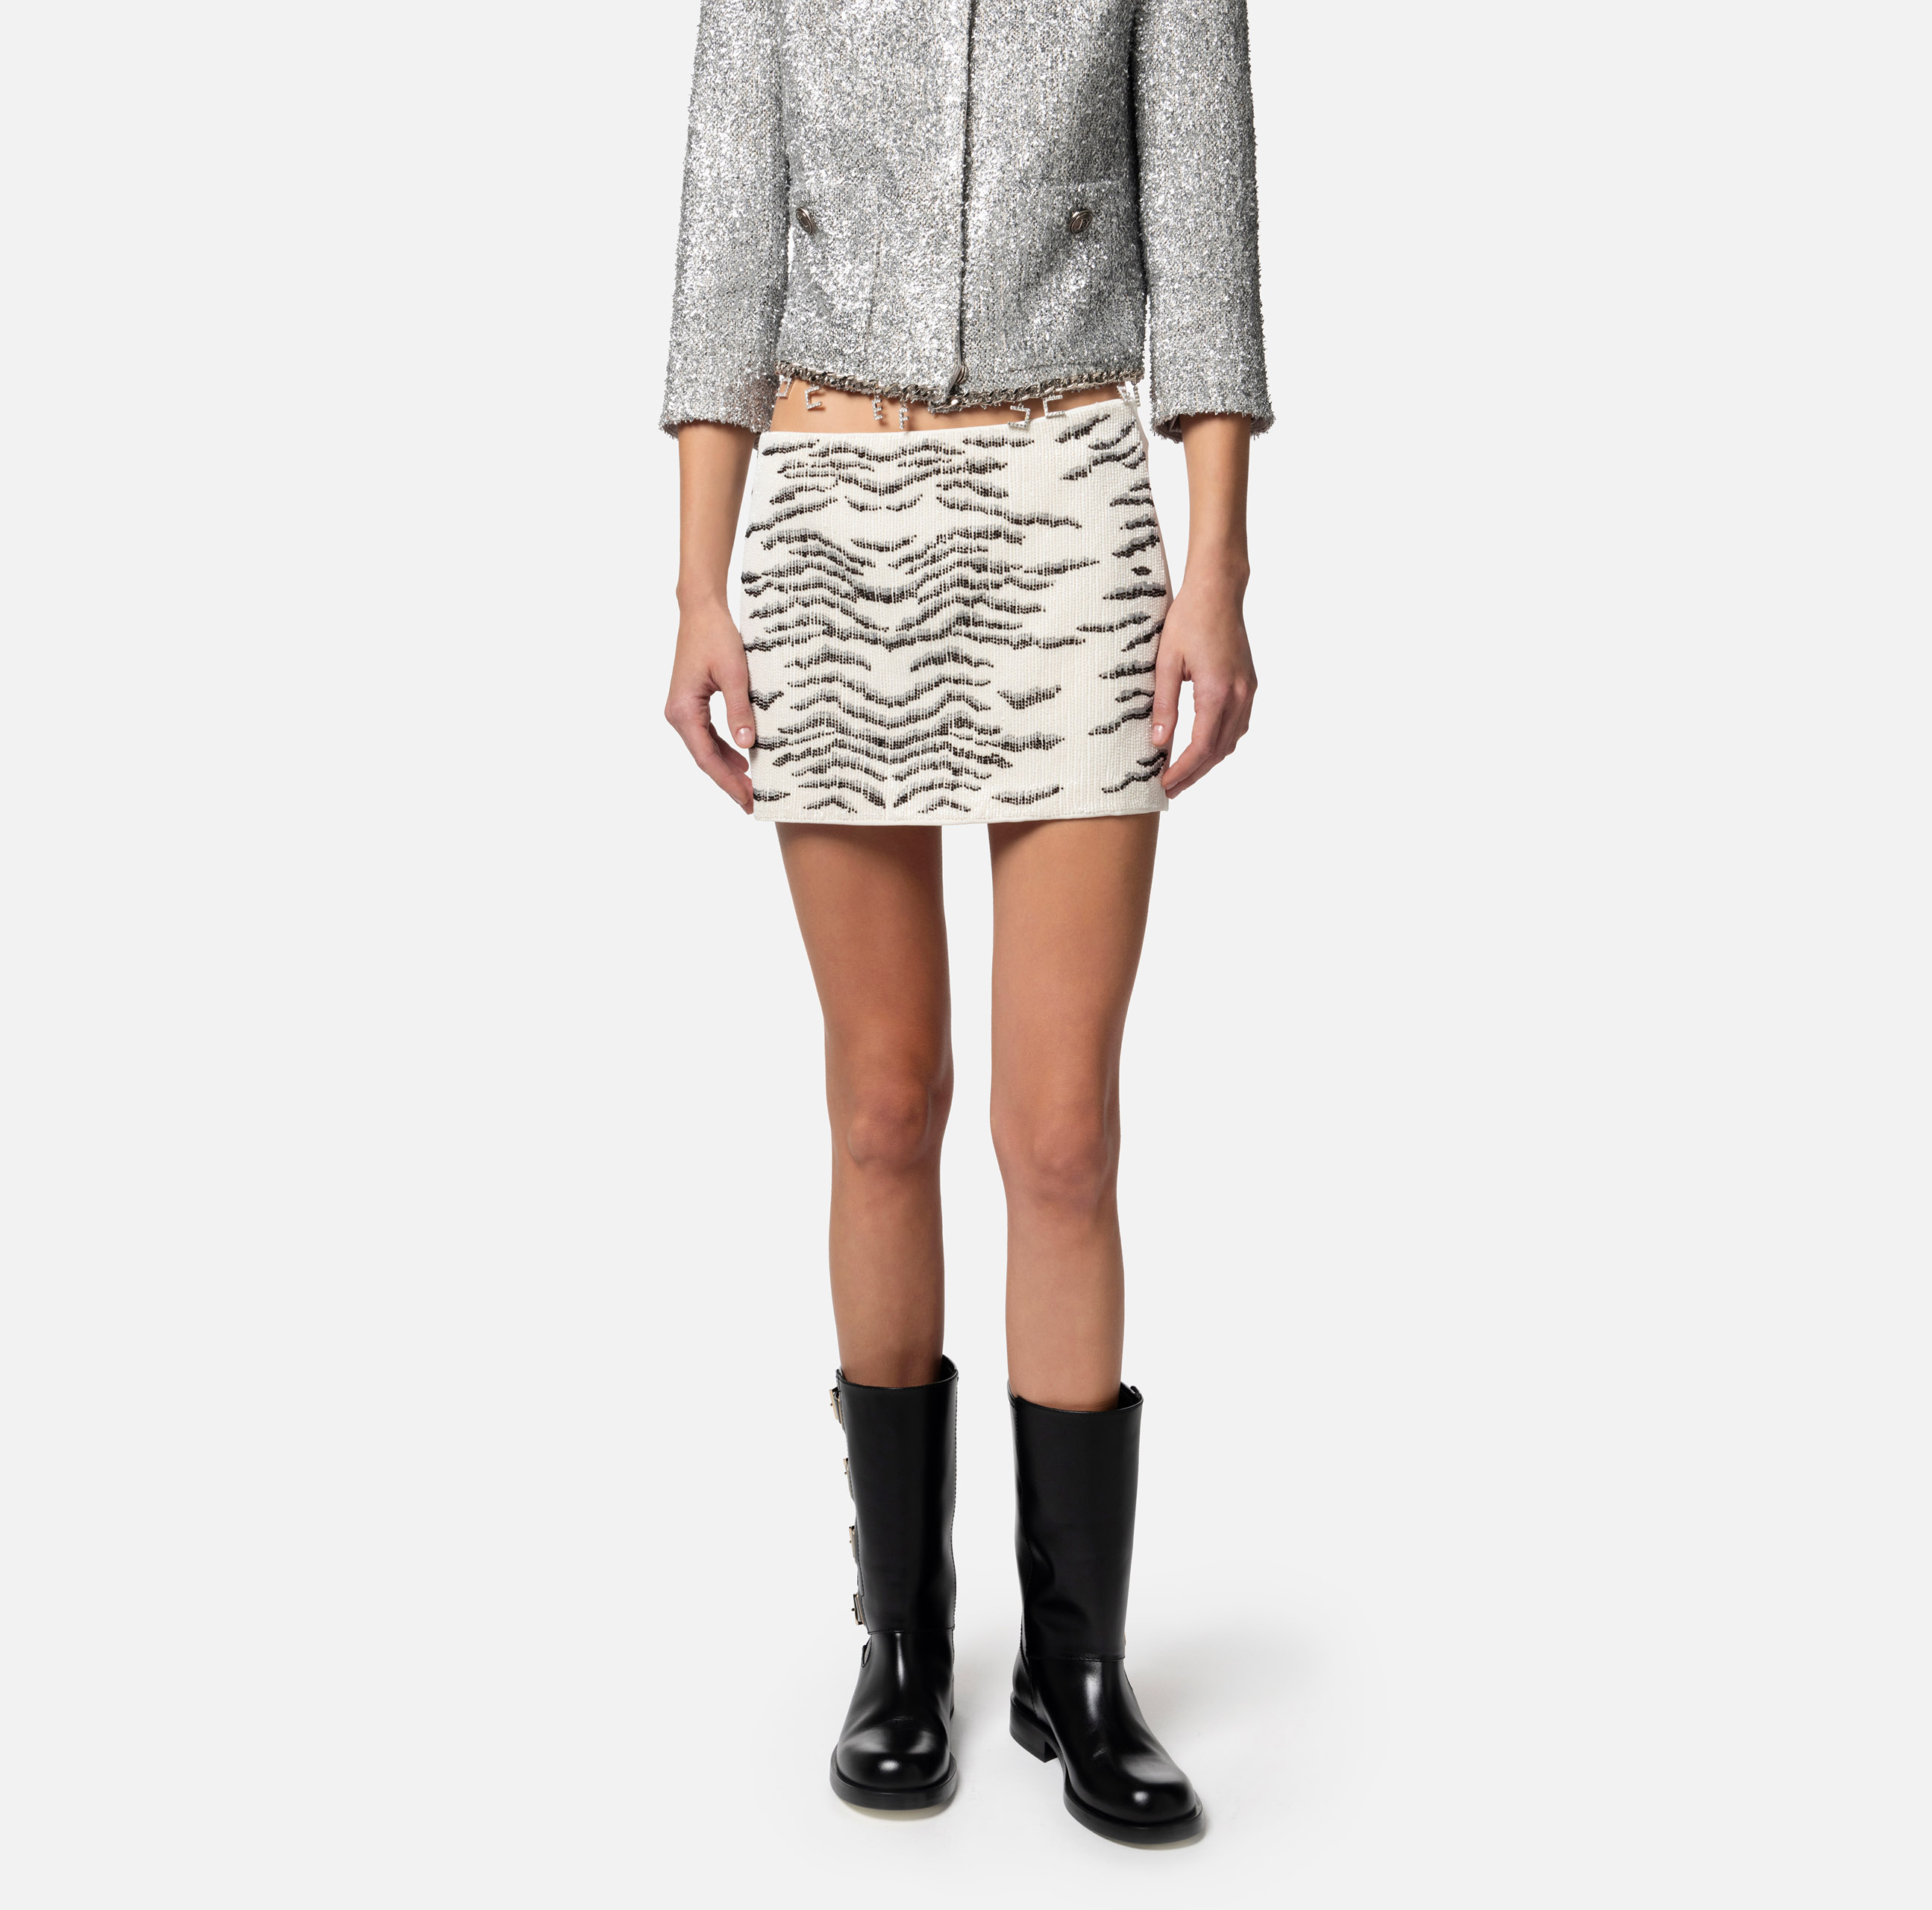 Miniskirt in crêpe fabric with animal print embroidery - Elisabetta Franchi